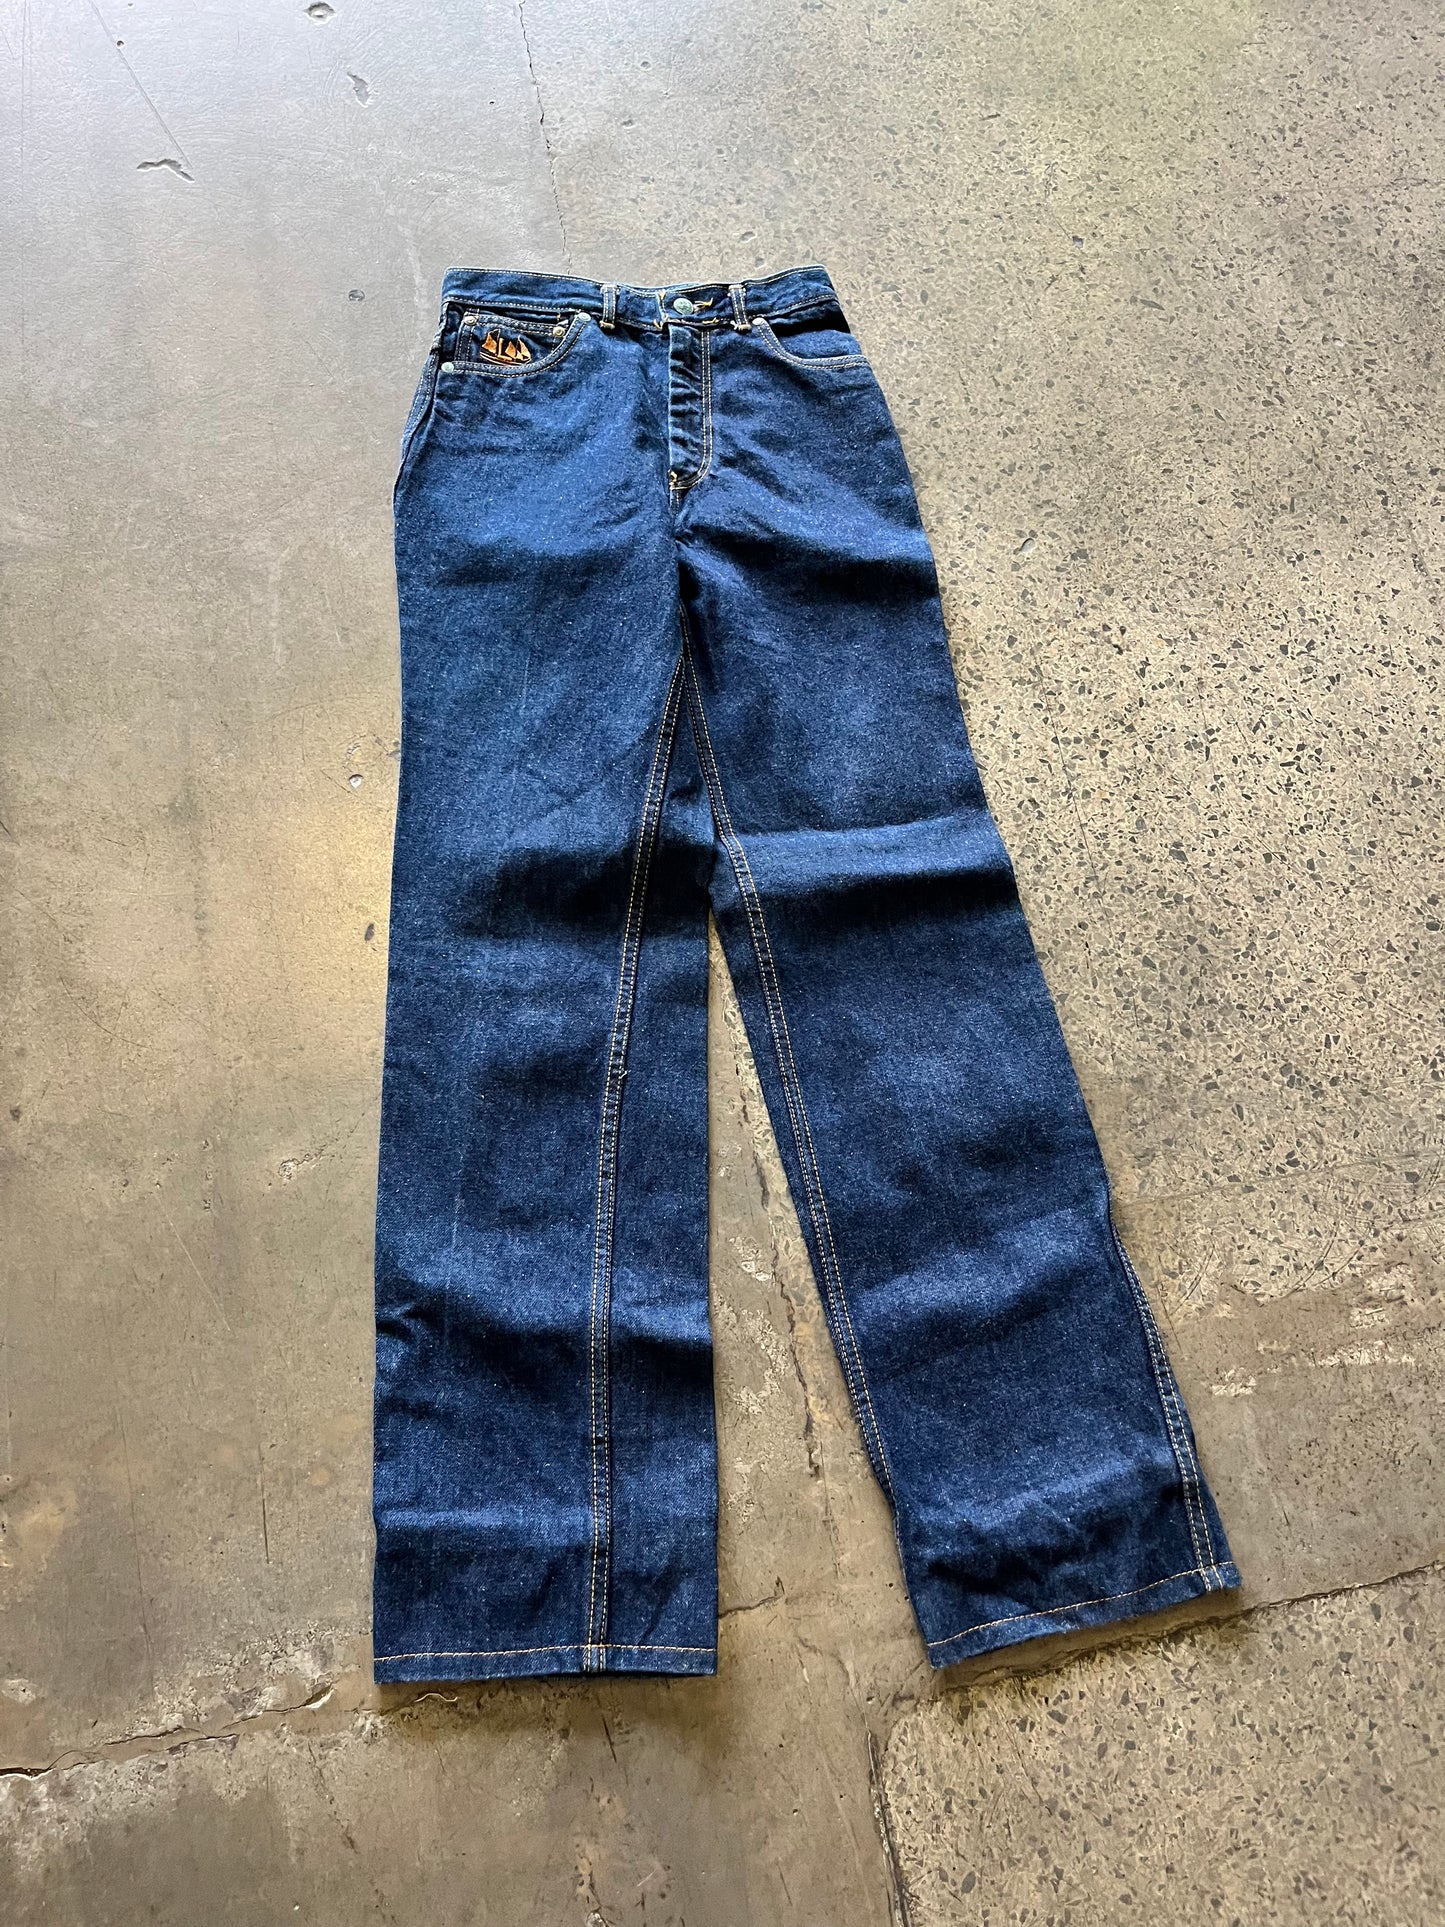 THE GET DOWN: Boo Boo’s Vintage 70s Denim Jeans (28)